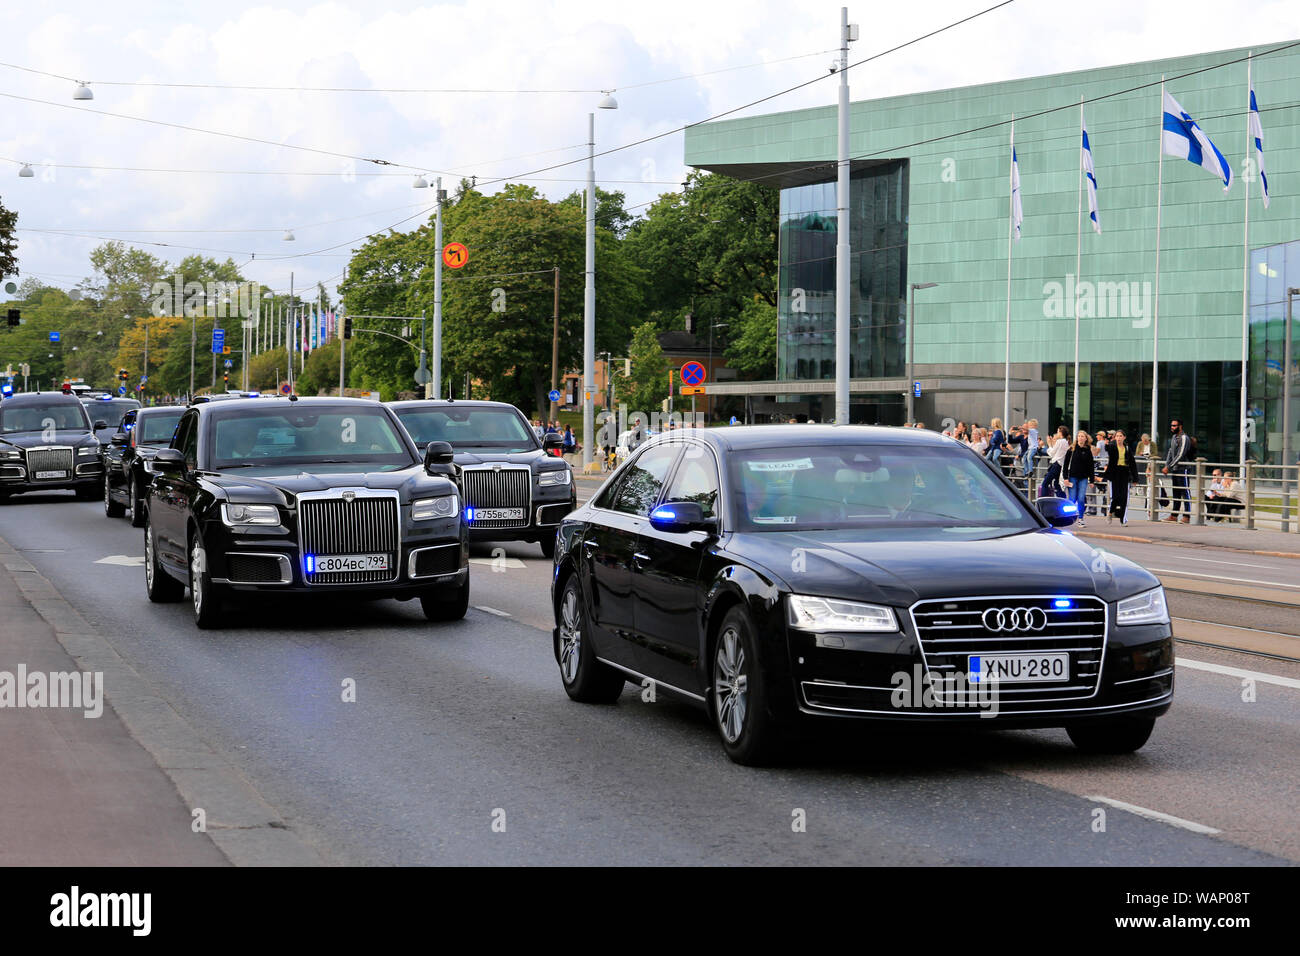 Helsinki, Finland. August 21, 2019. The presidential motorcade of Russian President Vladimir Putin passes along Mannerheimintie en route to official meeting with Finnish President Sauli Niinistö at the Presidential Palace. President Niinistö and President Putin will hold official discussions in the Presidential Palace, concluded by a dinner at the Suomenlinna Sea Fortress. Credit: Taina Sohlman/Alamy Live News Stock Photo